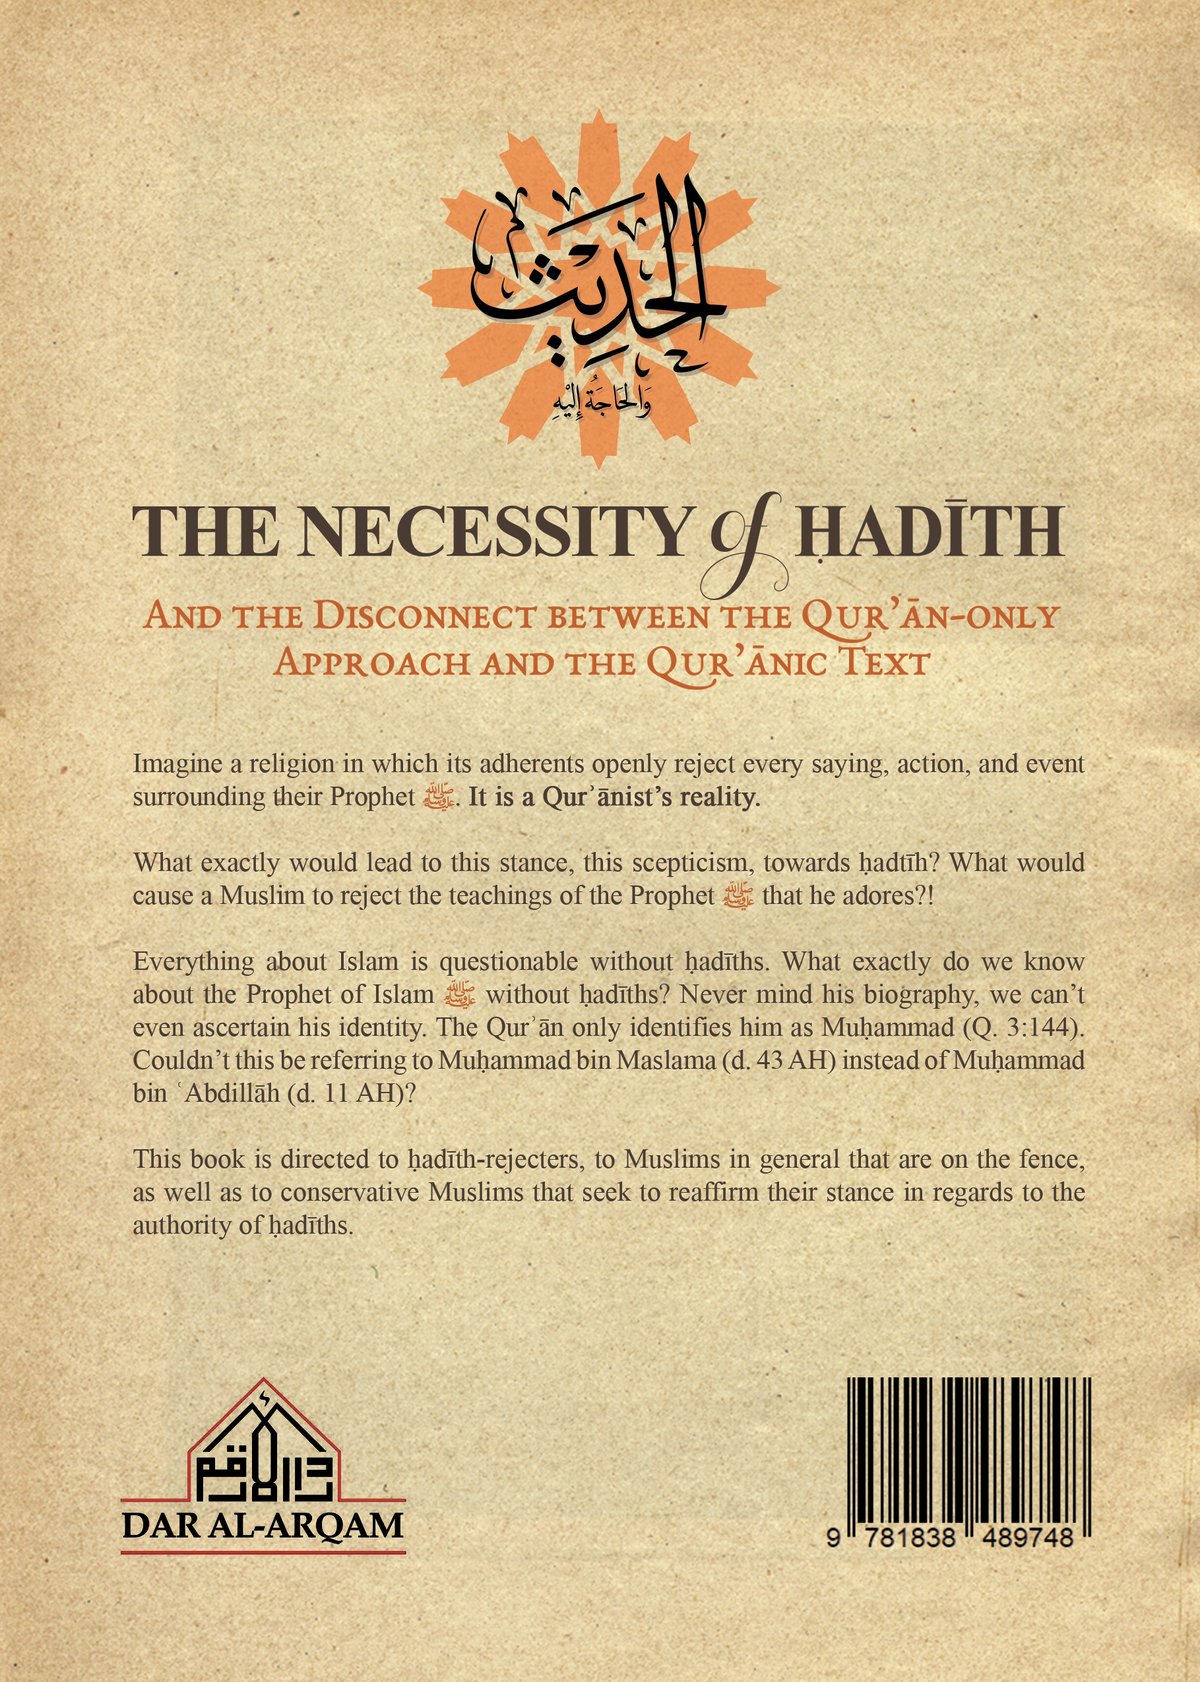 Image of The Necessity of Hadith